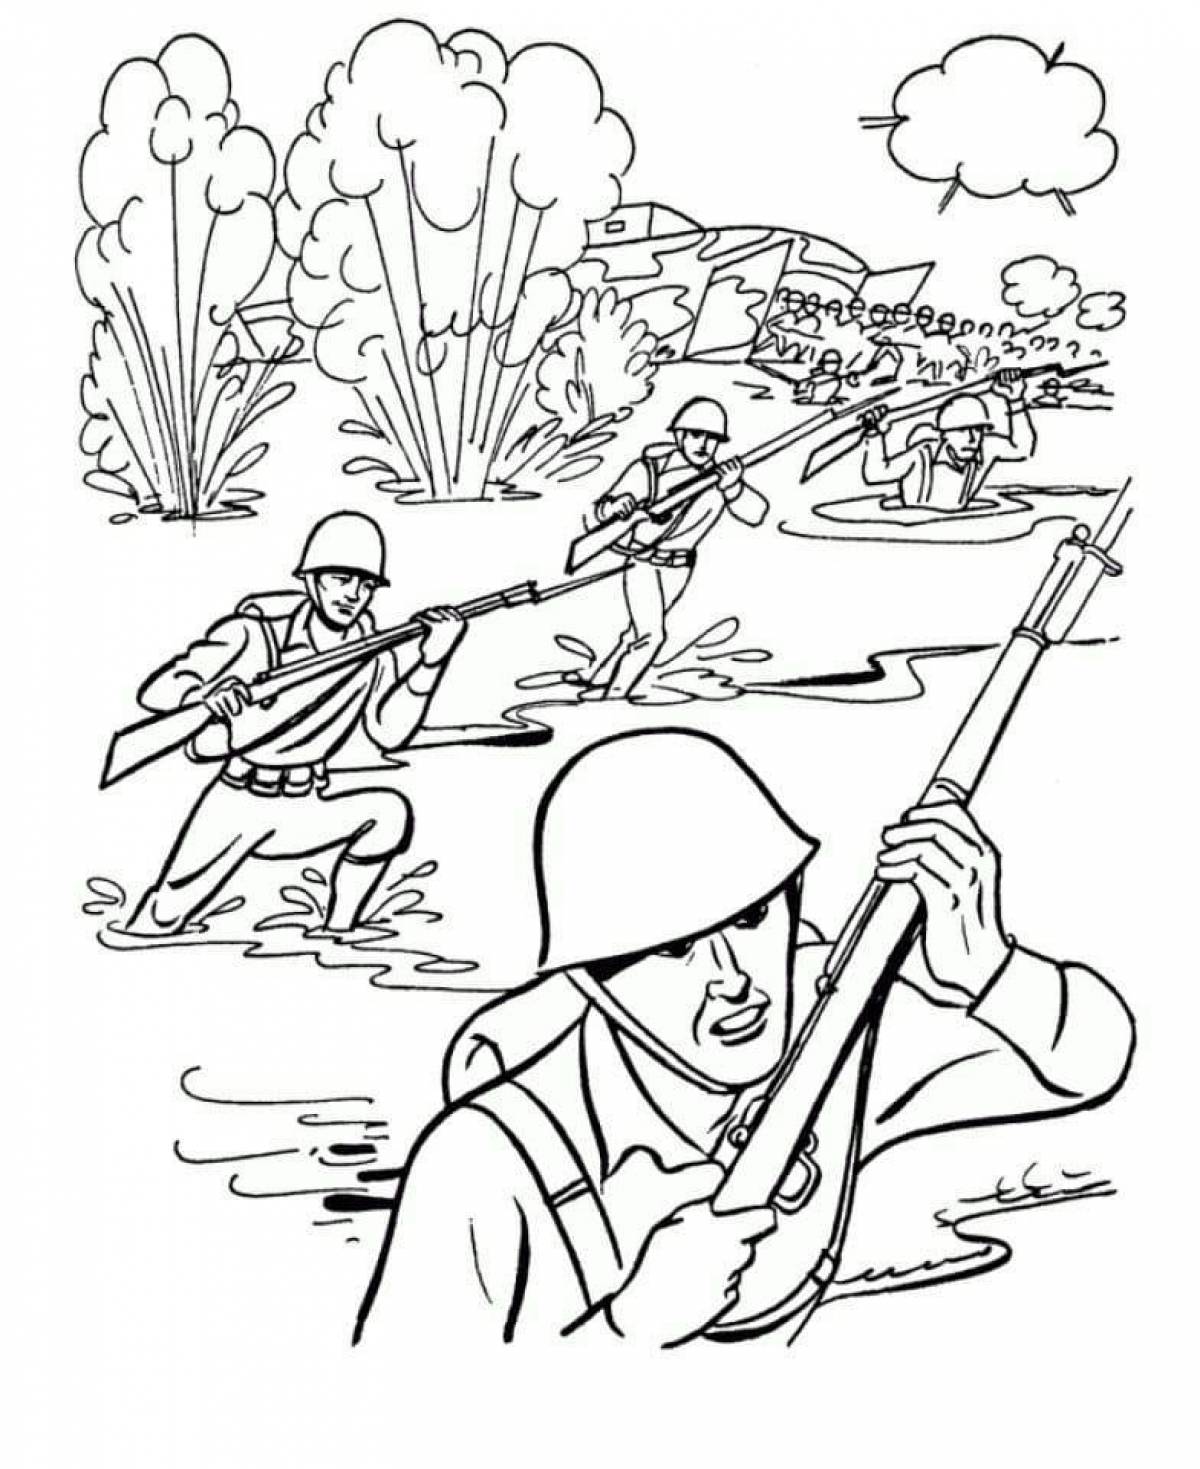 Imaginary war coloring book for elementary school kids